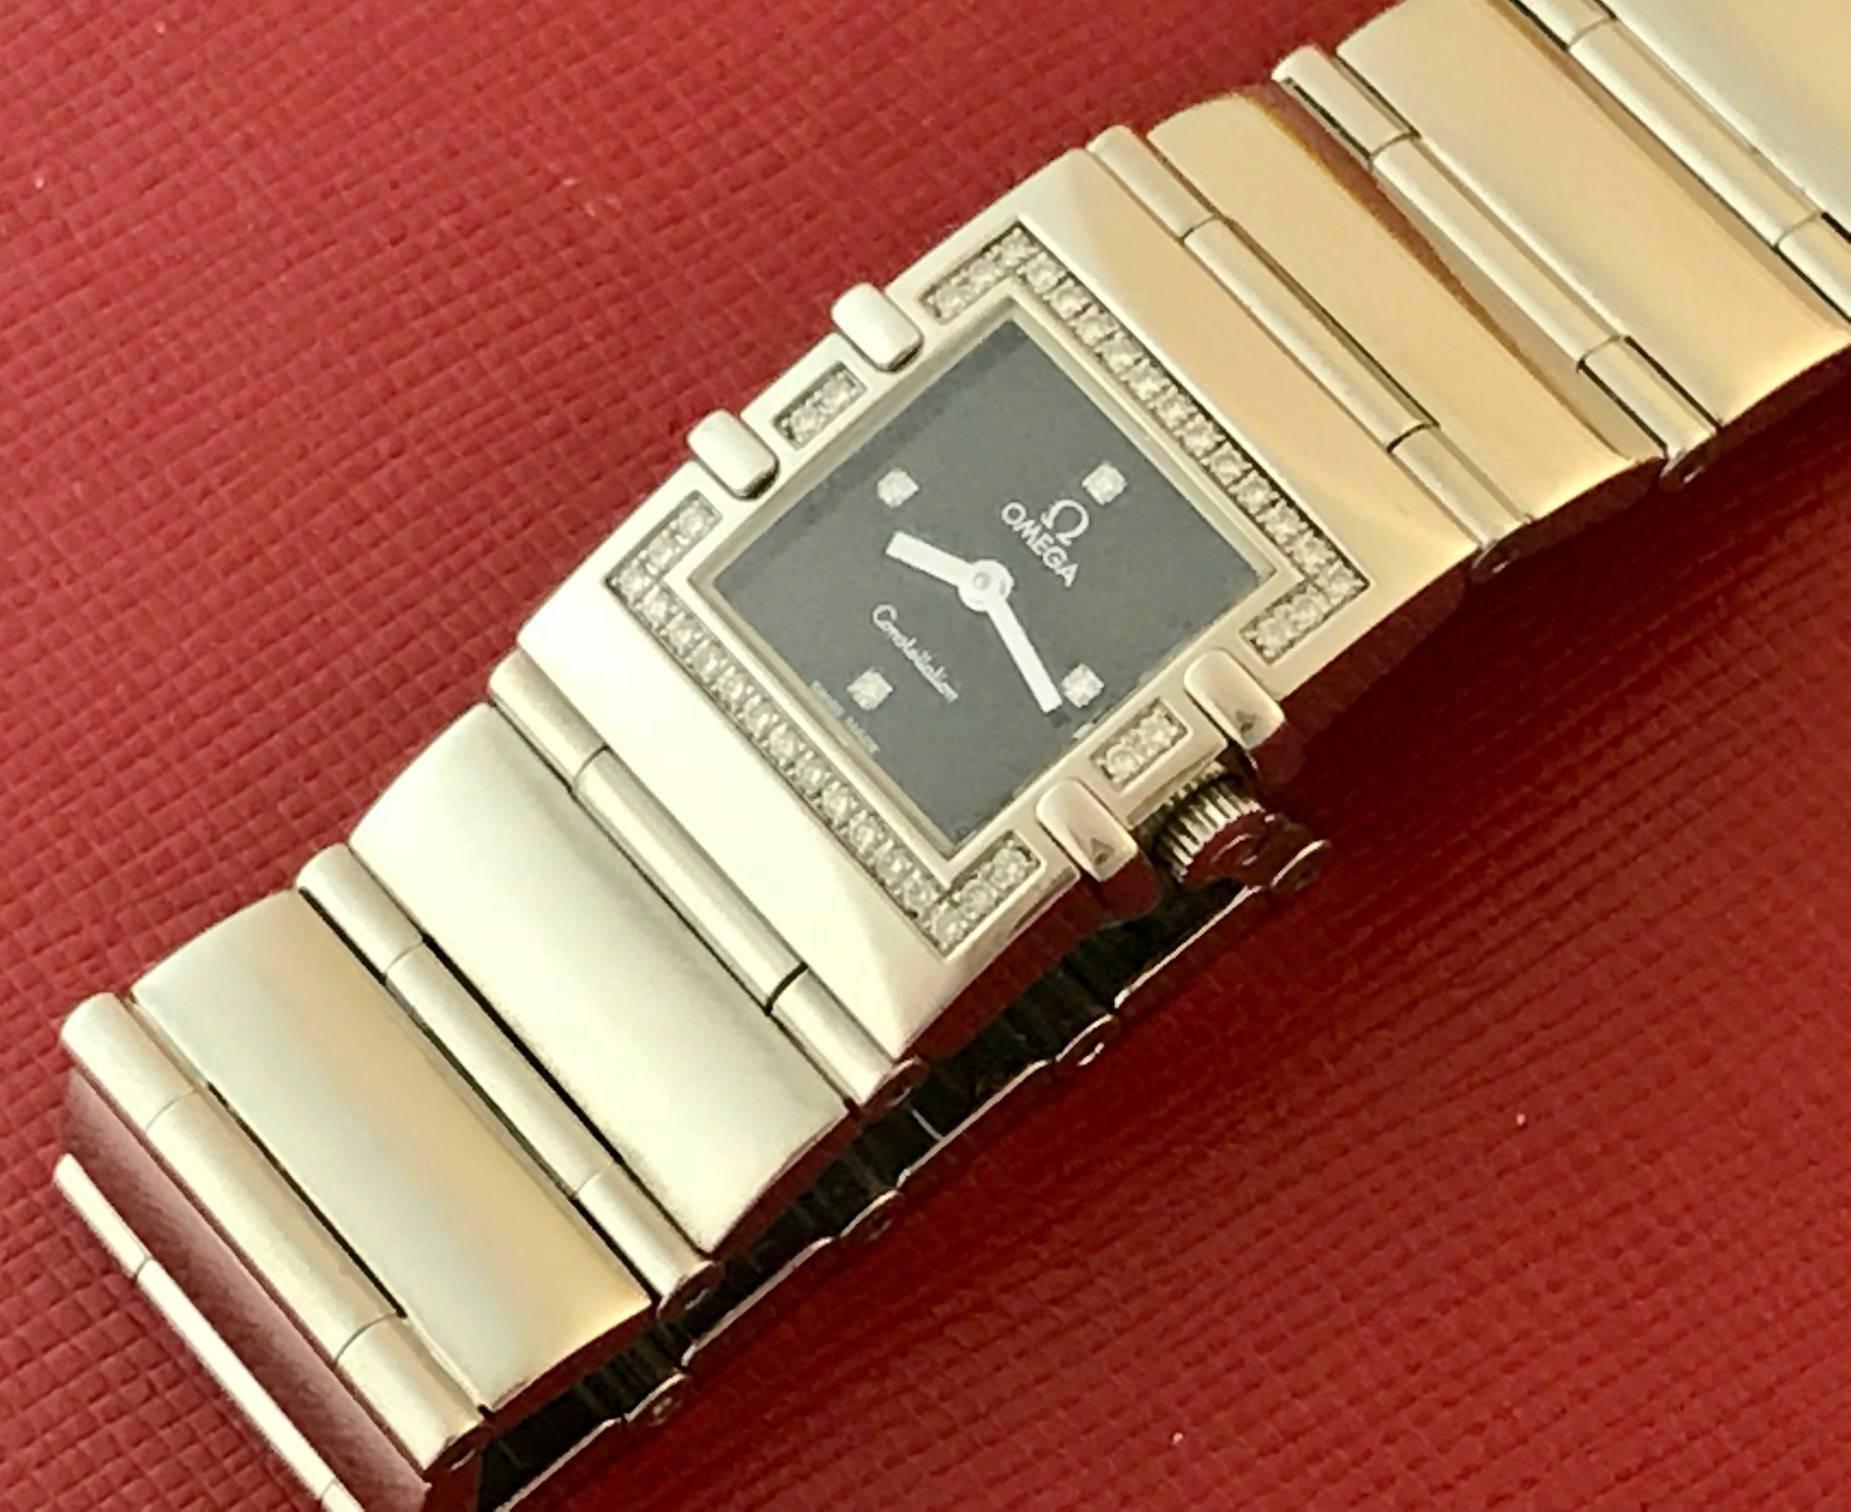 Omega Constellation Quadra ladies quartz pre-owned wrist watch. This beautiful classic Omega features a black dial with diamond hour markers and classic stainless steel case with diamond bezel. Measures 19mm x 25mm. This watch is in pristine